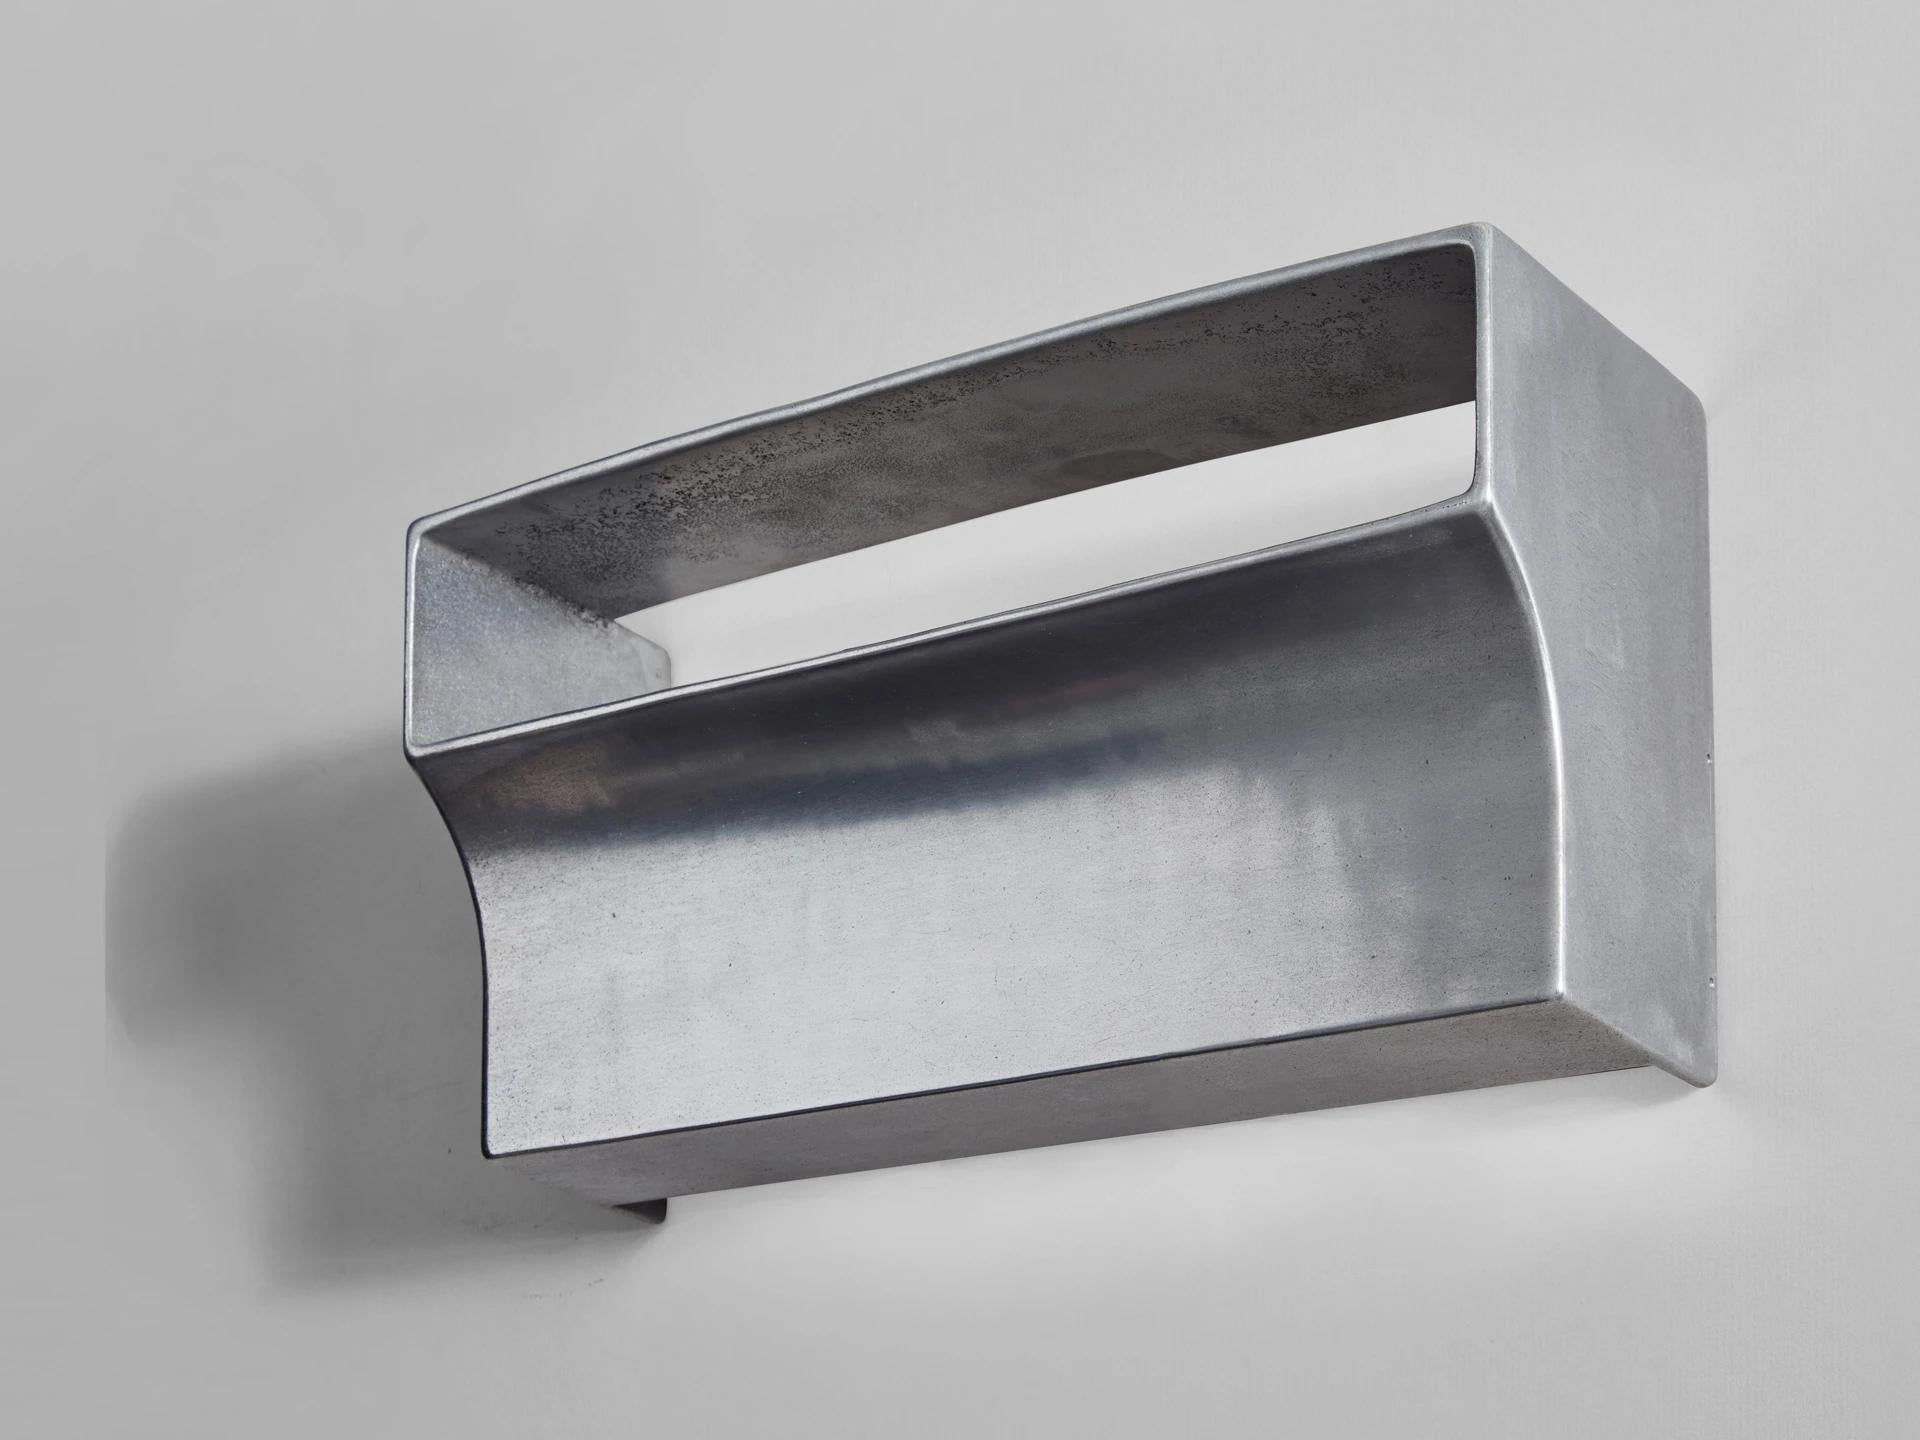 Scoop aluminium wall light by Henry Wilson
Scoop wall light is sand cast in aluminium. Openings on the top and bottom of the sconce allow light to wash up and down the walls, while the slot at the front projects light outwards while hiding the